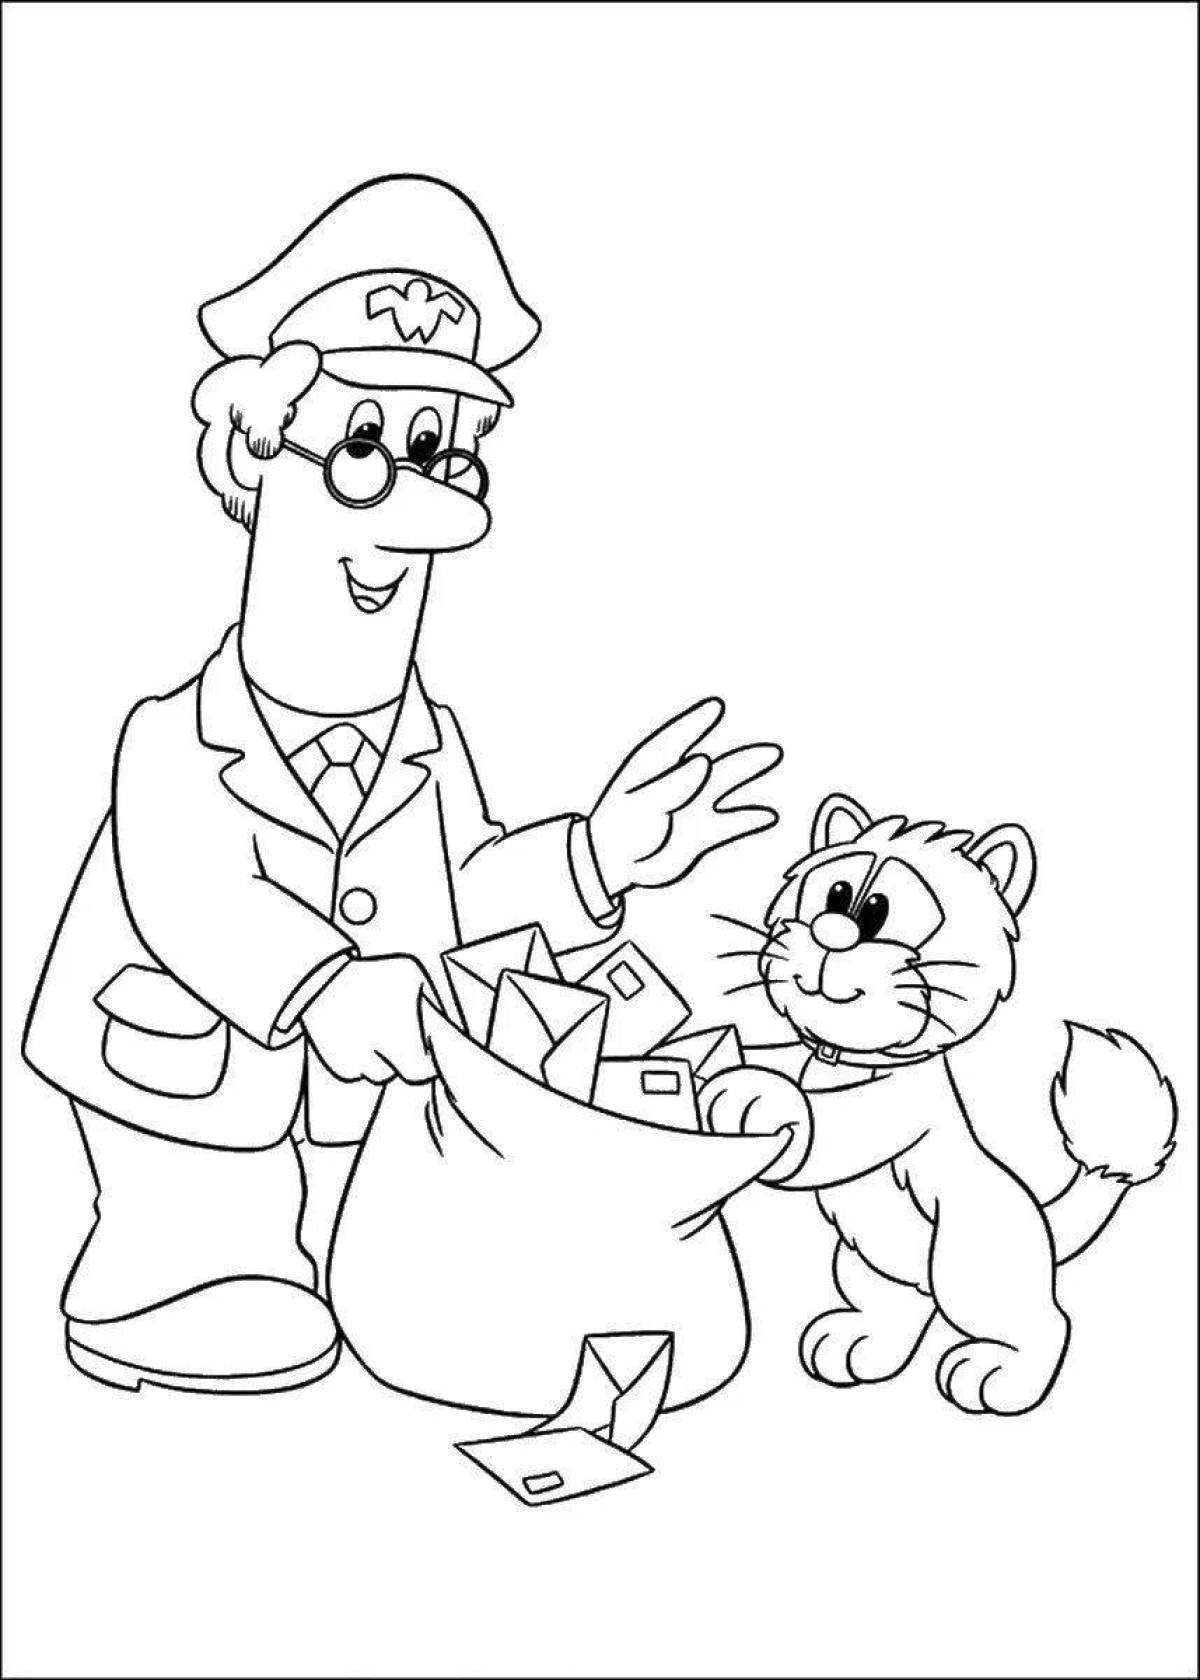 Colorful coloring Pechkin postman for kids